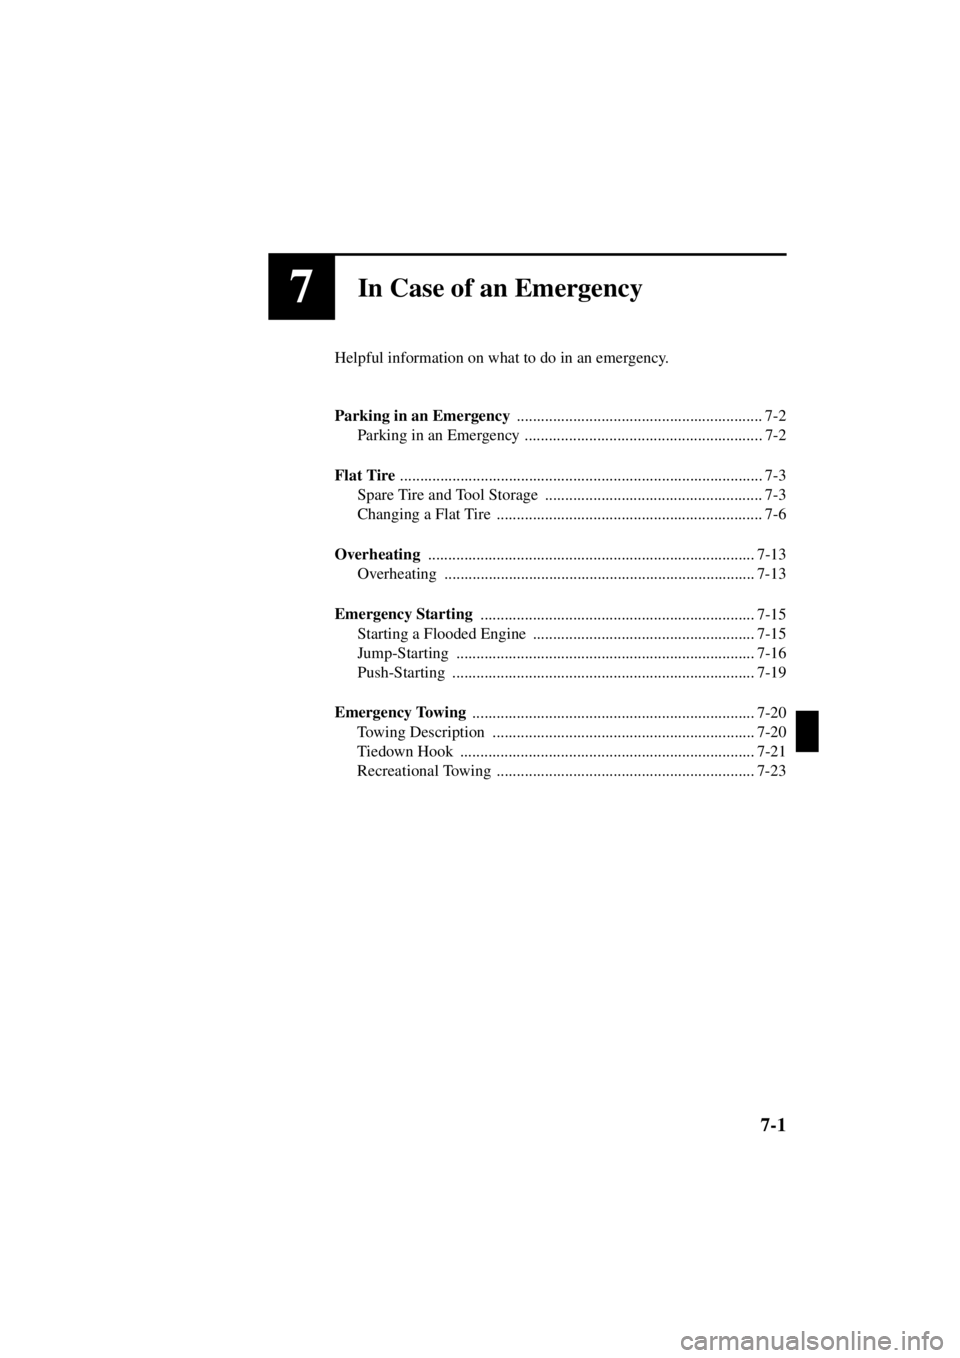 MAZDA MODEL 3 4-DOOR 2004  Owners Manual 7-1
Form No. 8S18-EA-03I
7In Case of an Emergency
Helpful information on what to do in an emergency.
Parking in an Emergency ............................................................. 7-2
Parking i